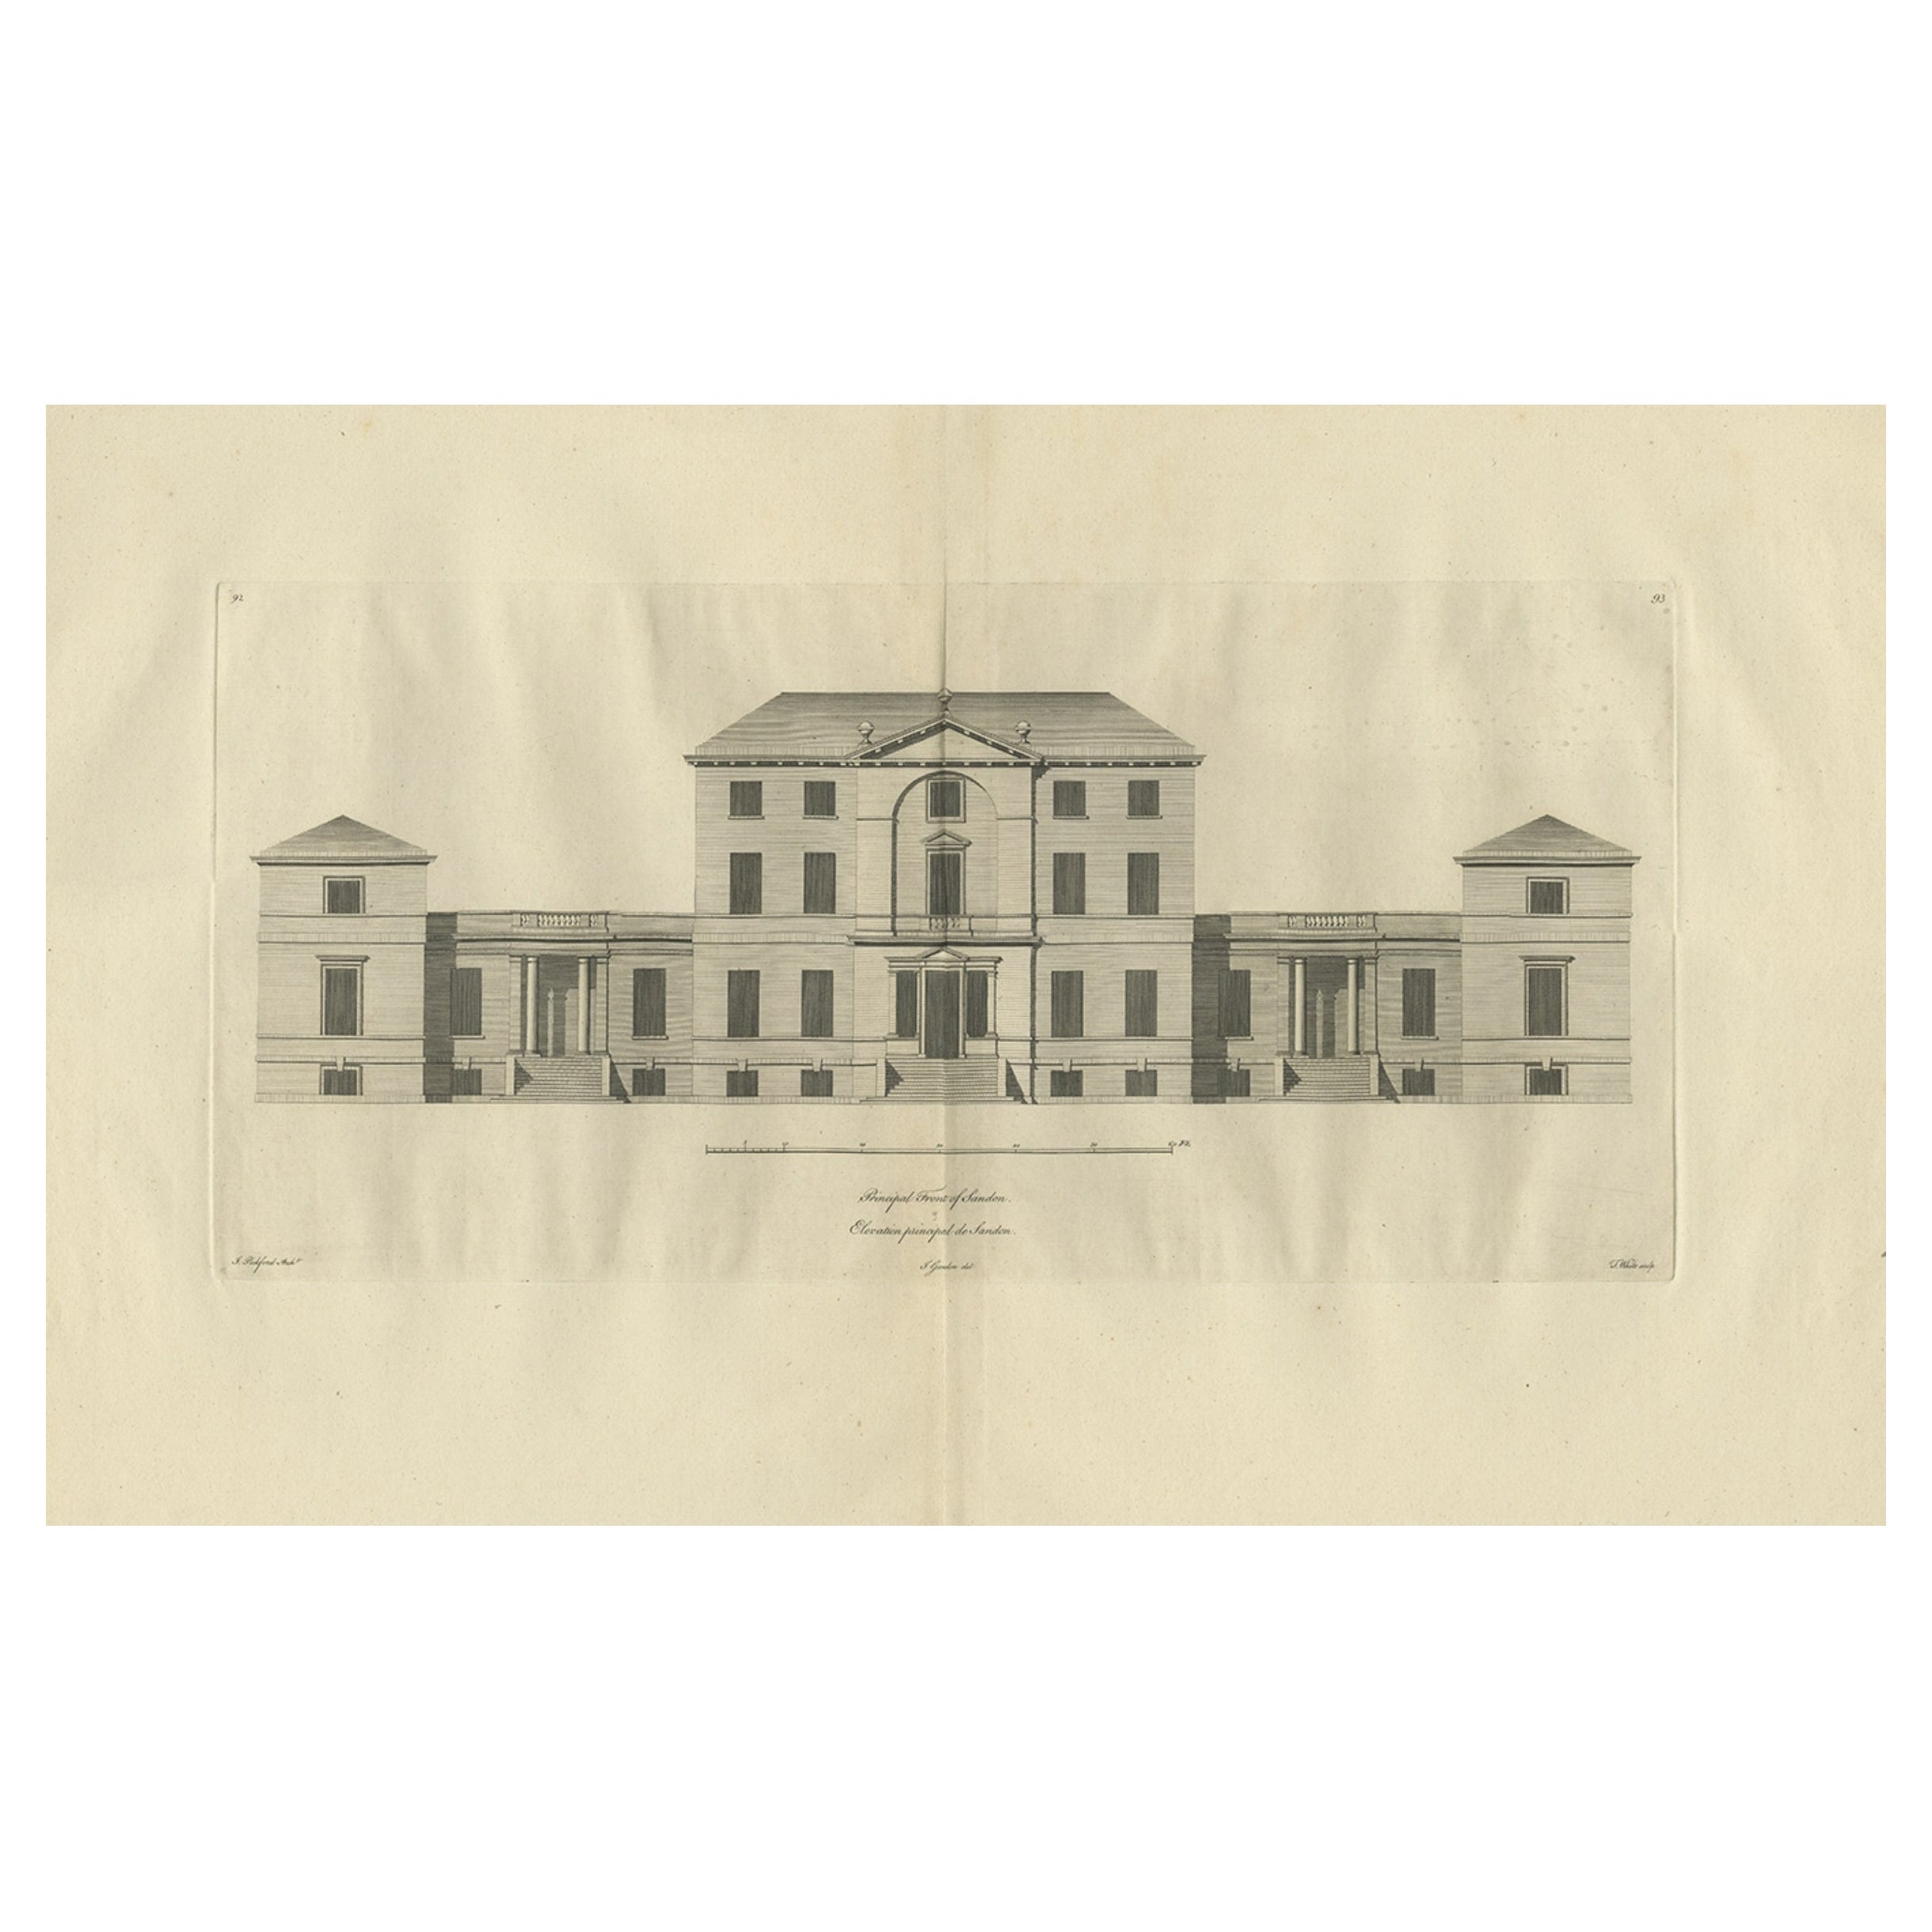 Antique Architectural Elevation of Sandon Hall, Staffordshire in England, c.1770